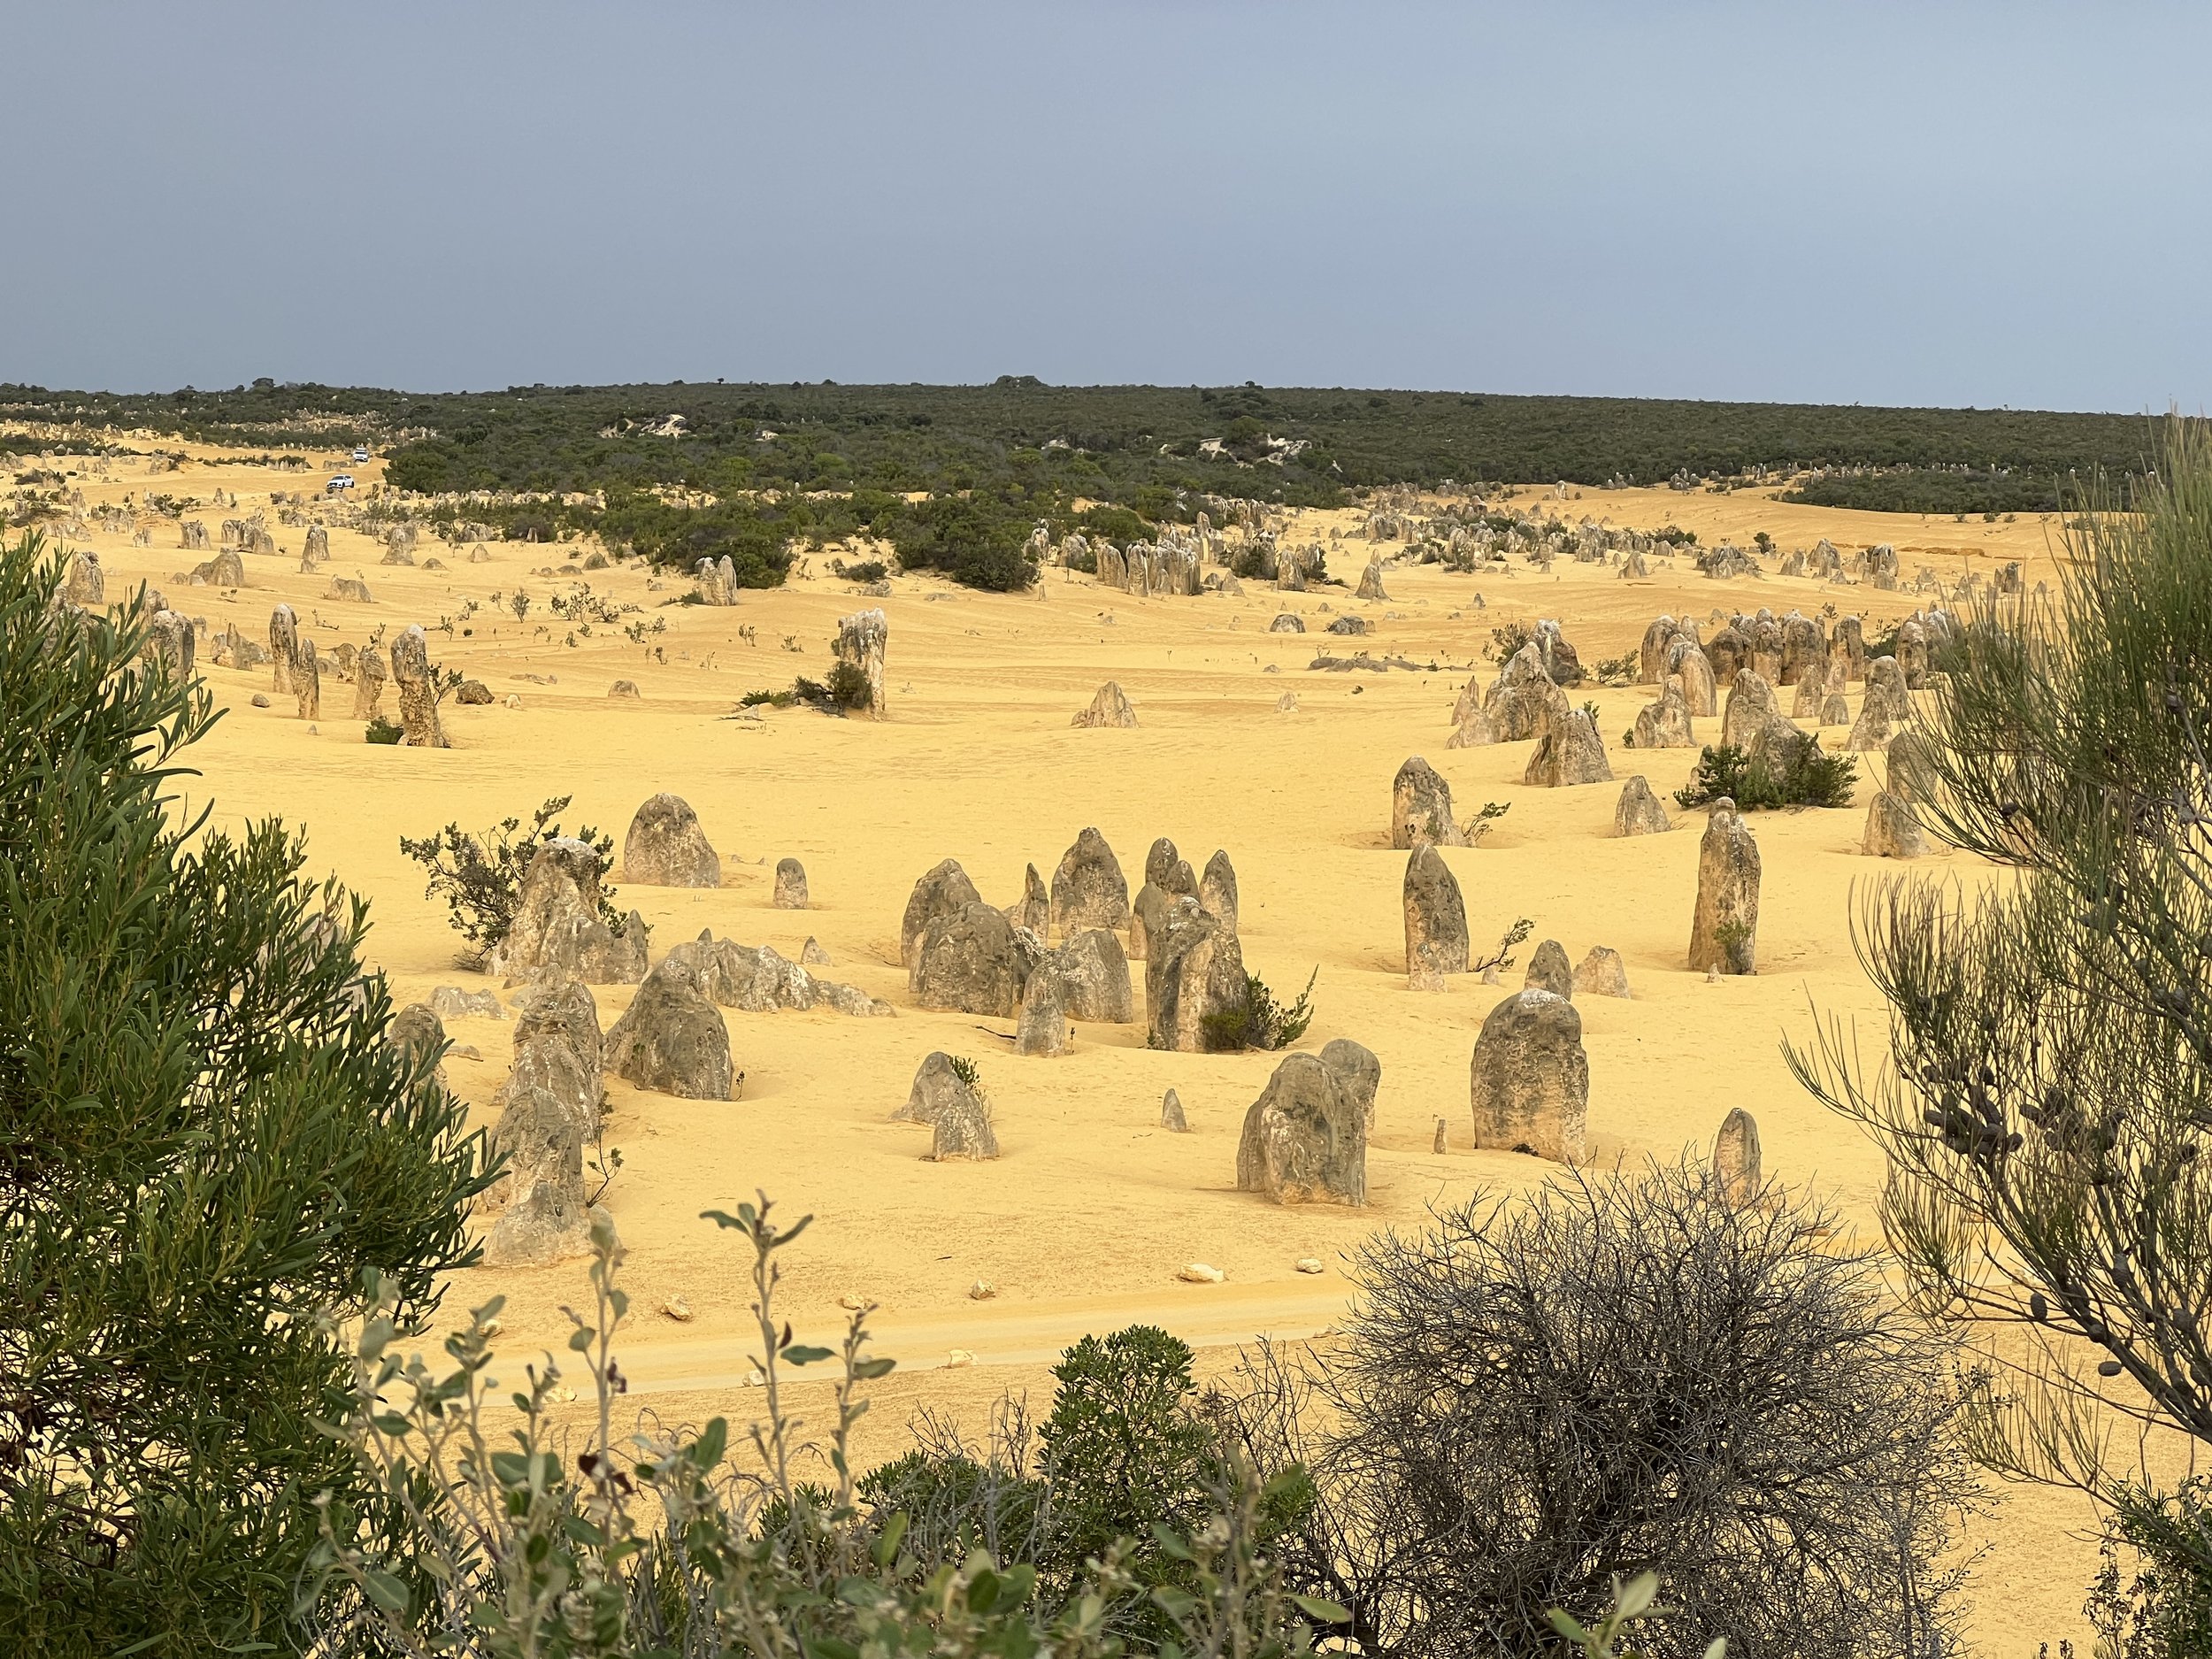 The Pinnacles are limestone formations in the desert